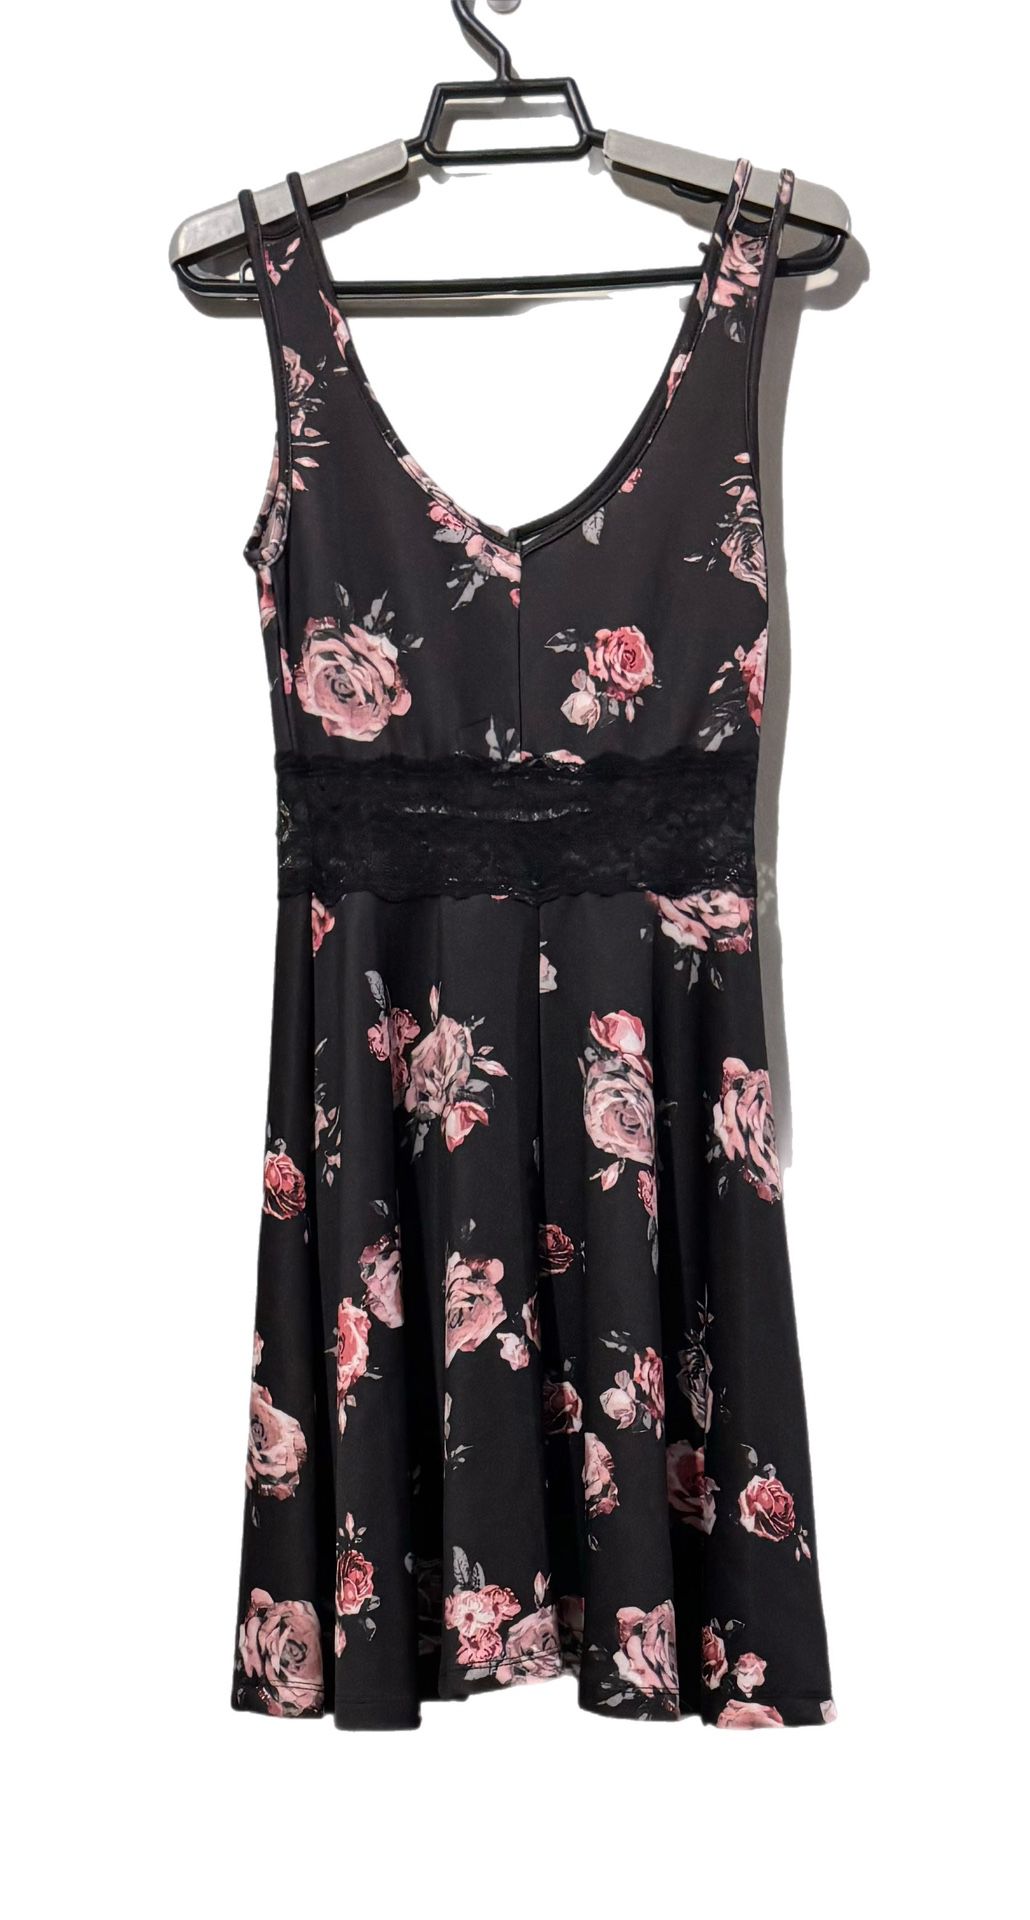 Rue 21 (C) Floral Sundress Sz XS Black Lace Roses Lightweight Pullover GUC